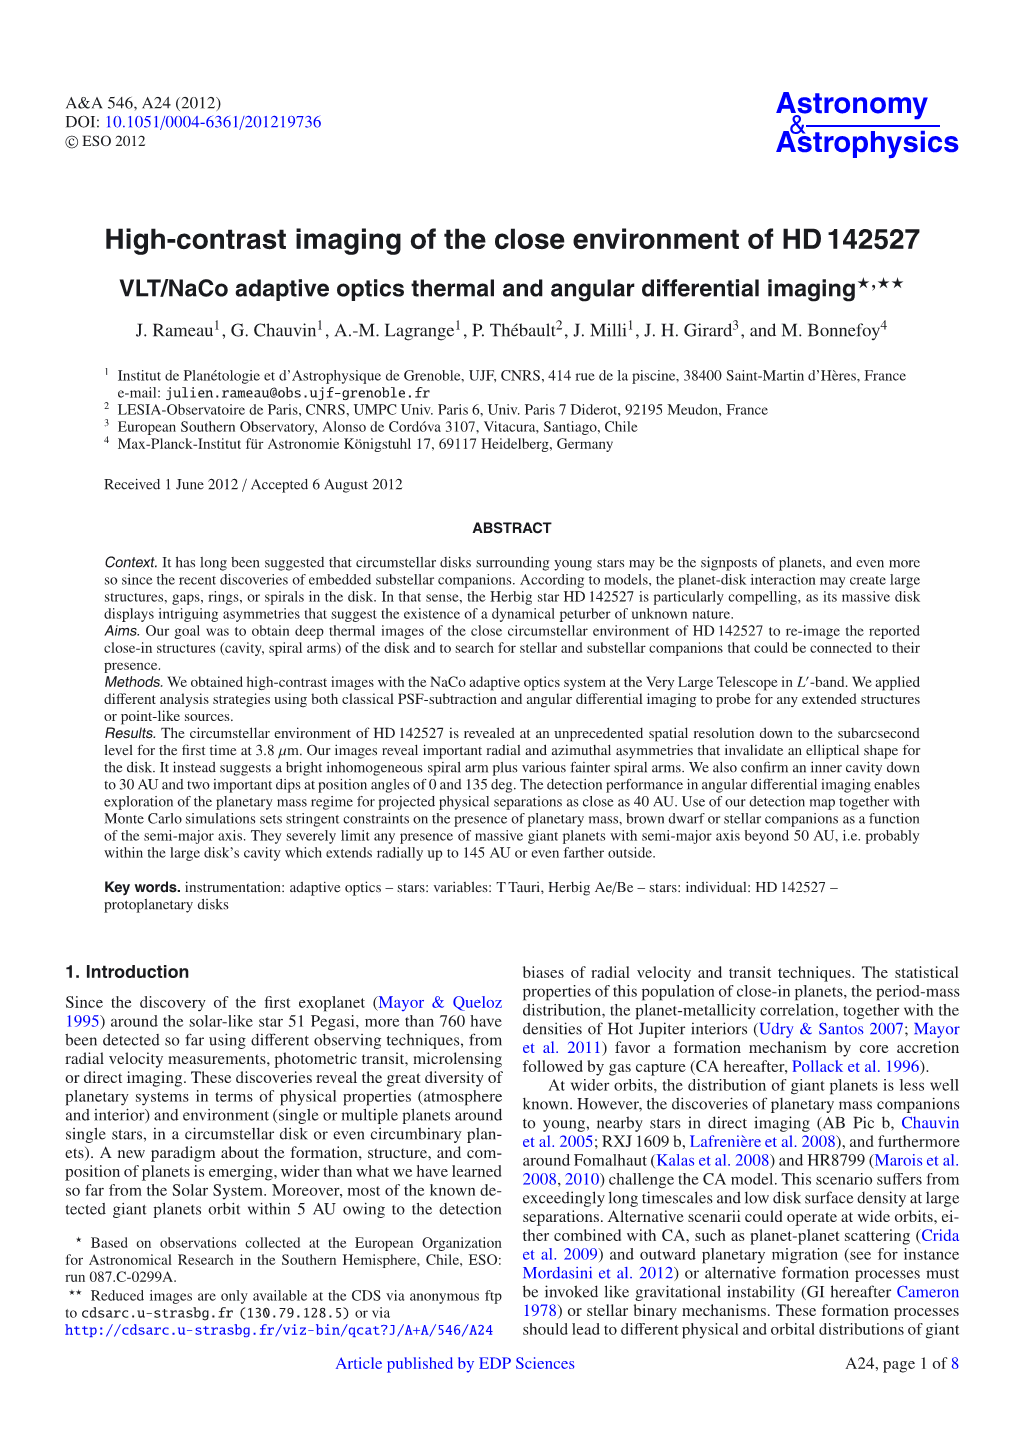 High-Contrast Imaging of the Close Environment of HD 142527 VLT/Naco Adaptive Optics Thermal and Angular Differential Imaging�,